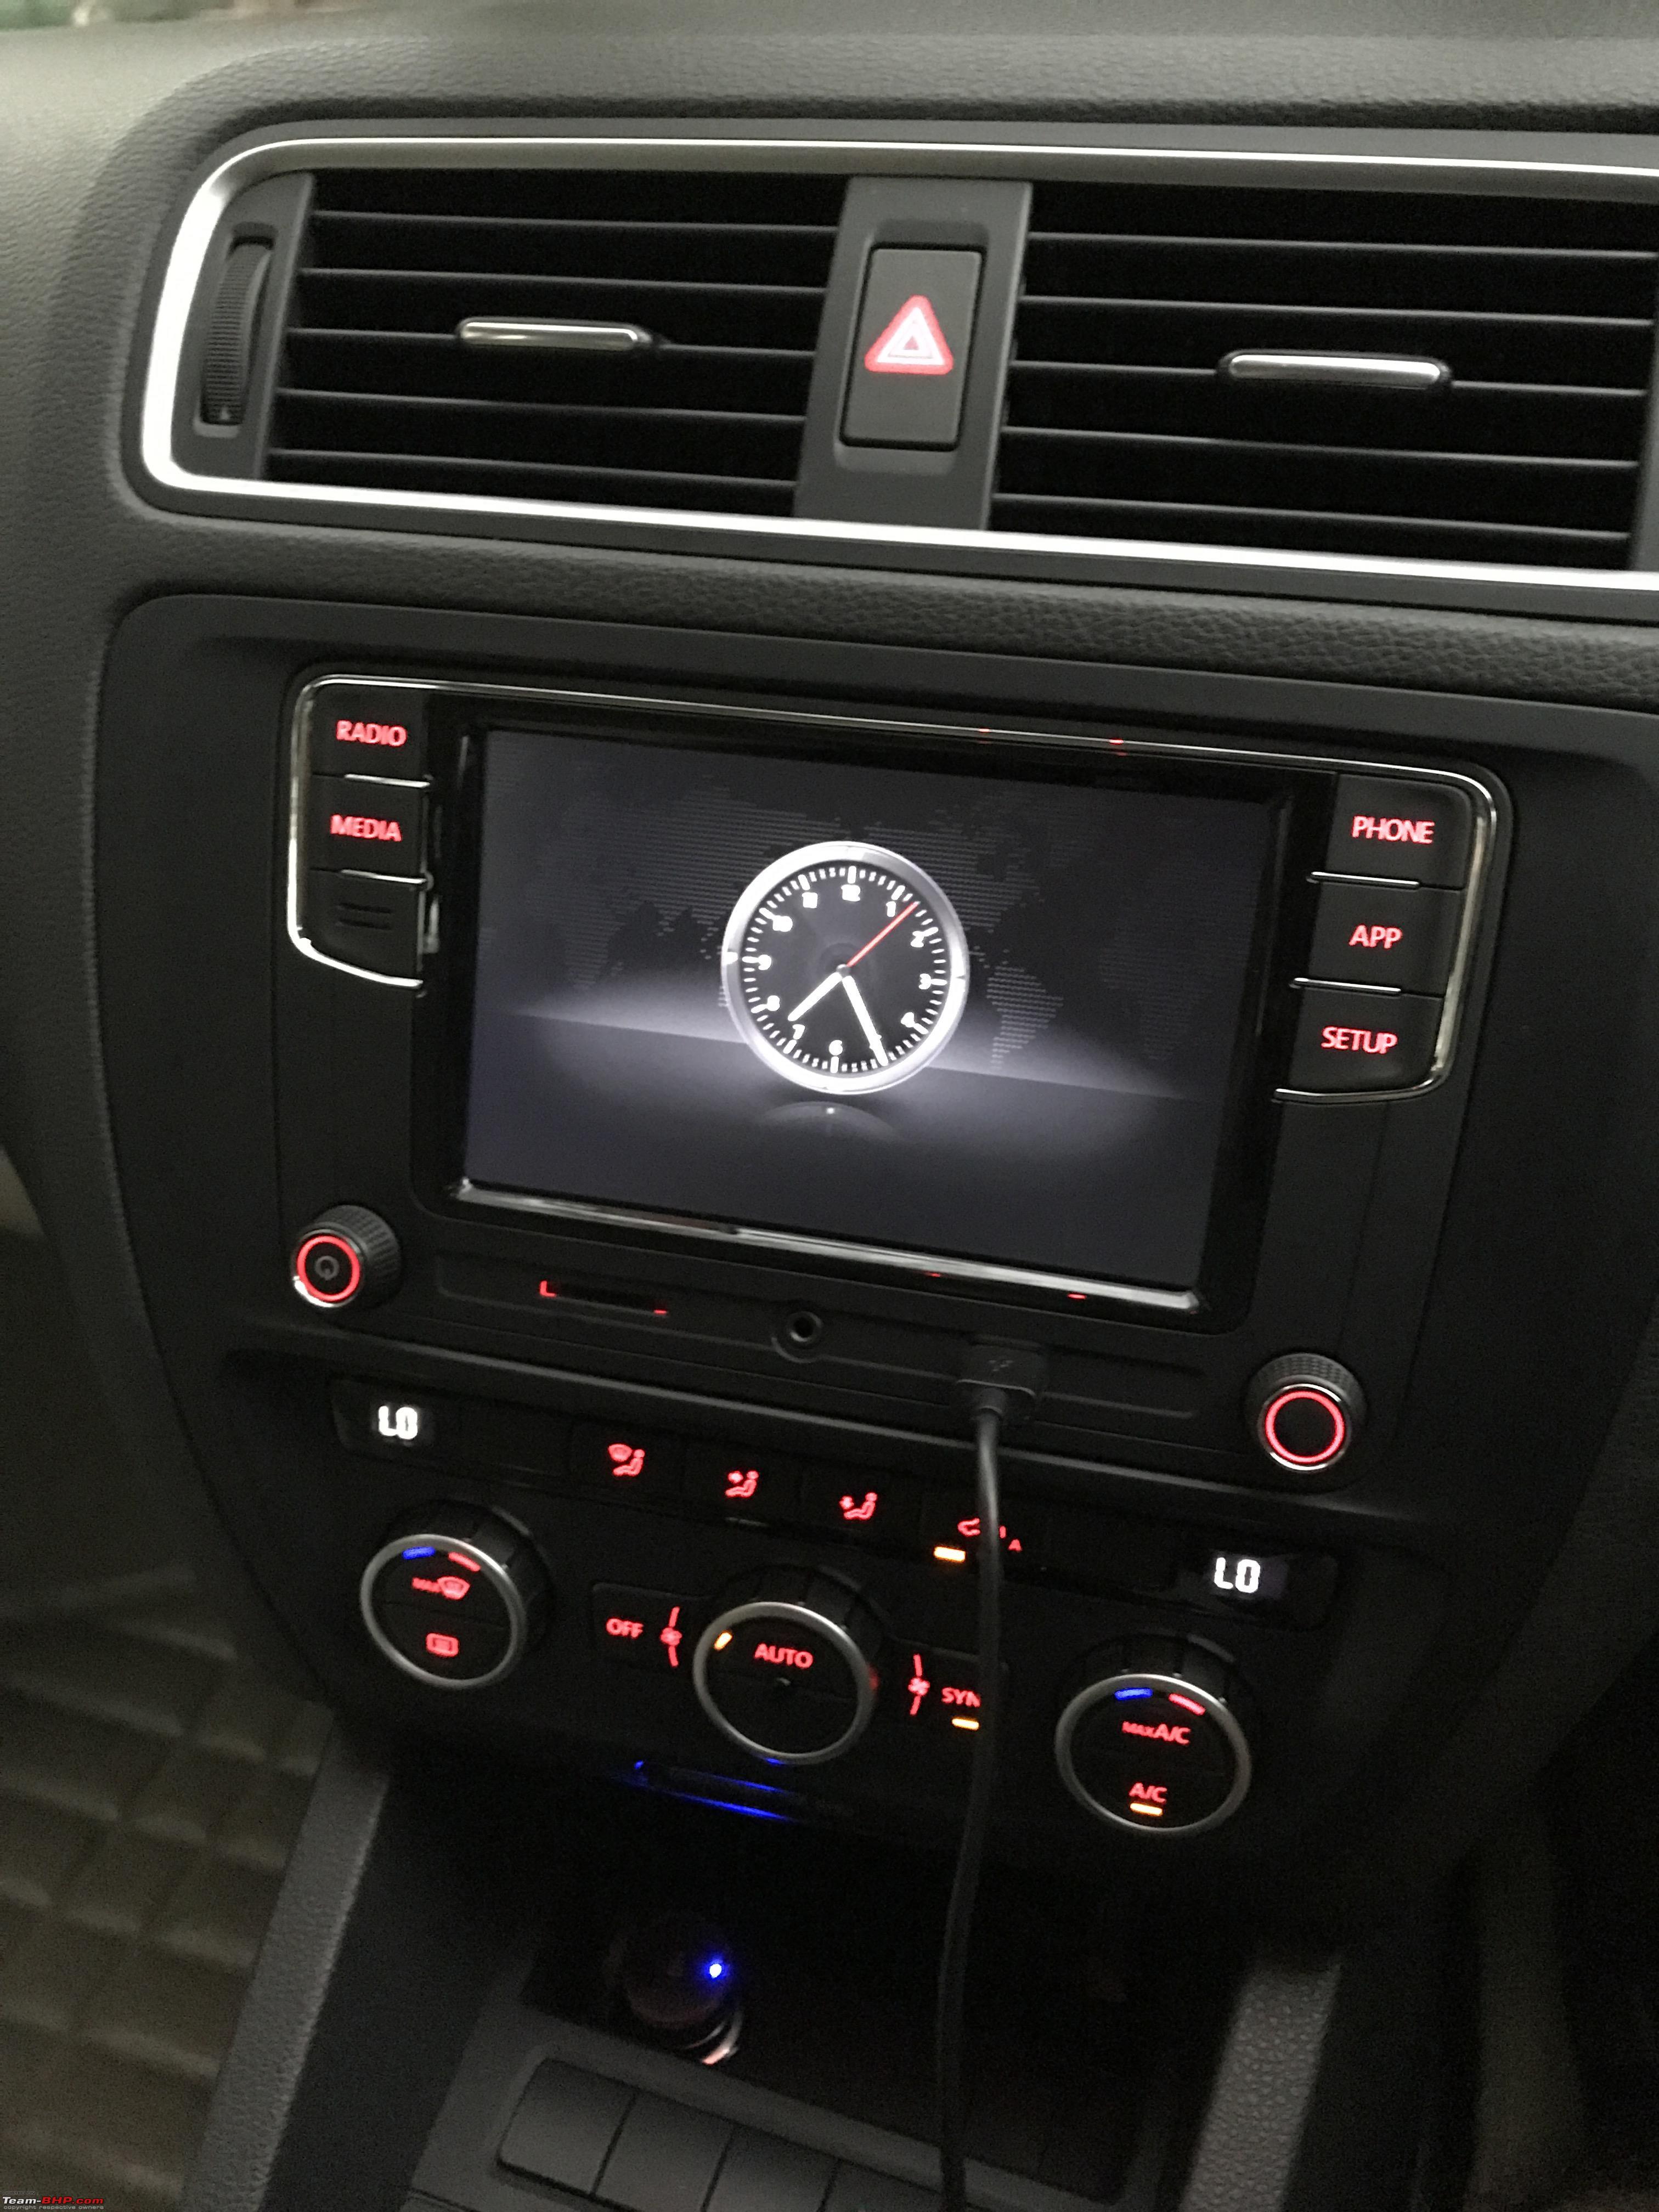 VW Polo/Vento : Replaced stock RCD320 with RCD330 Plus ...